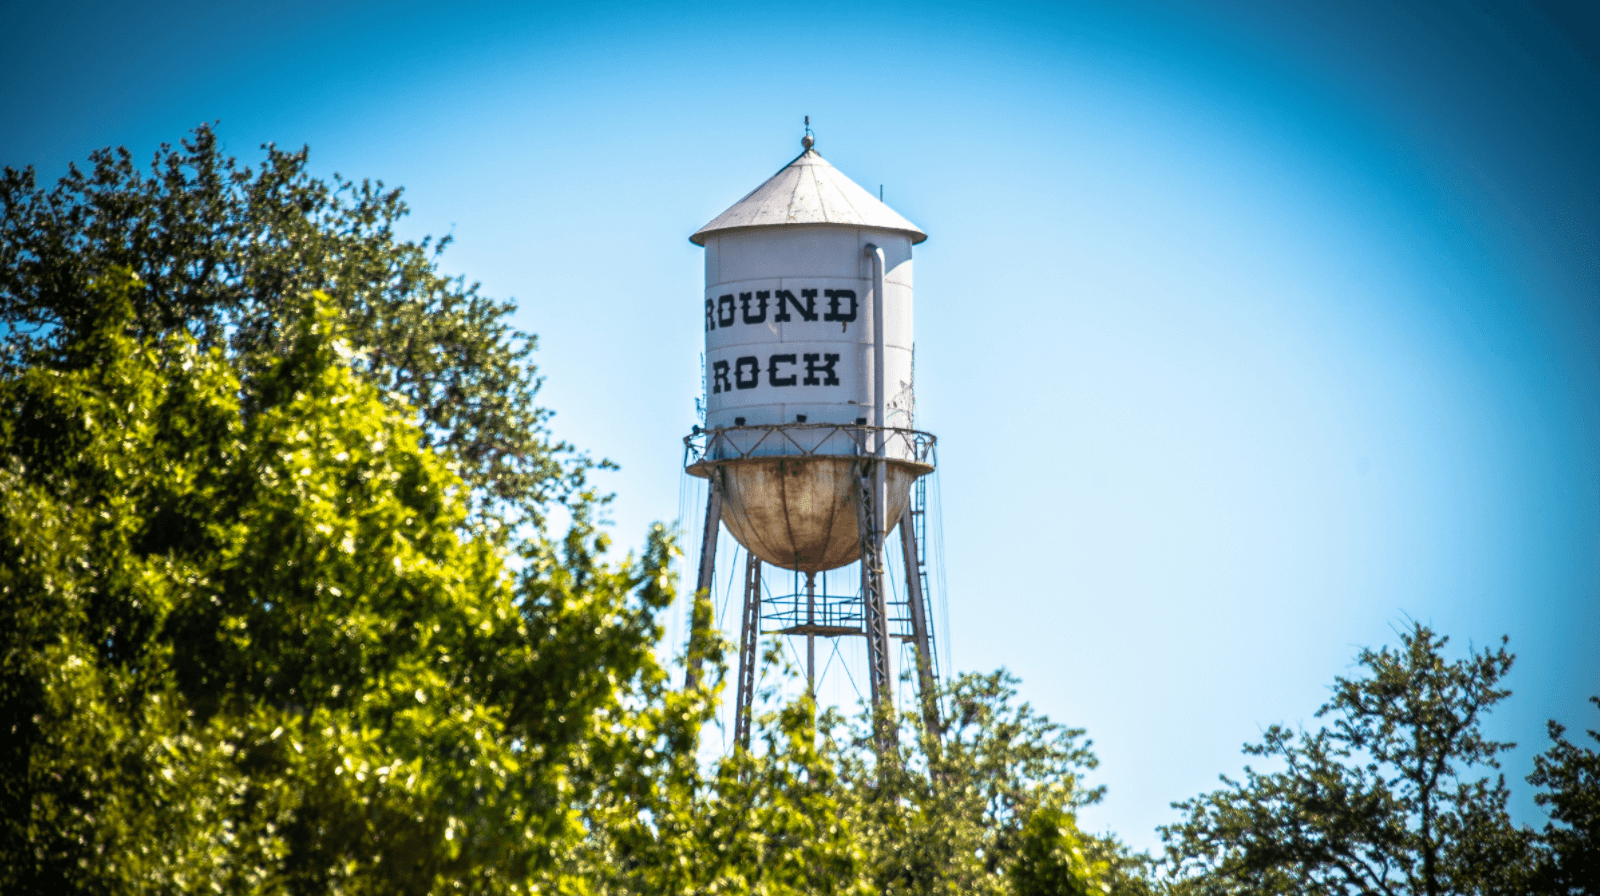 City of Round Rock: Home